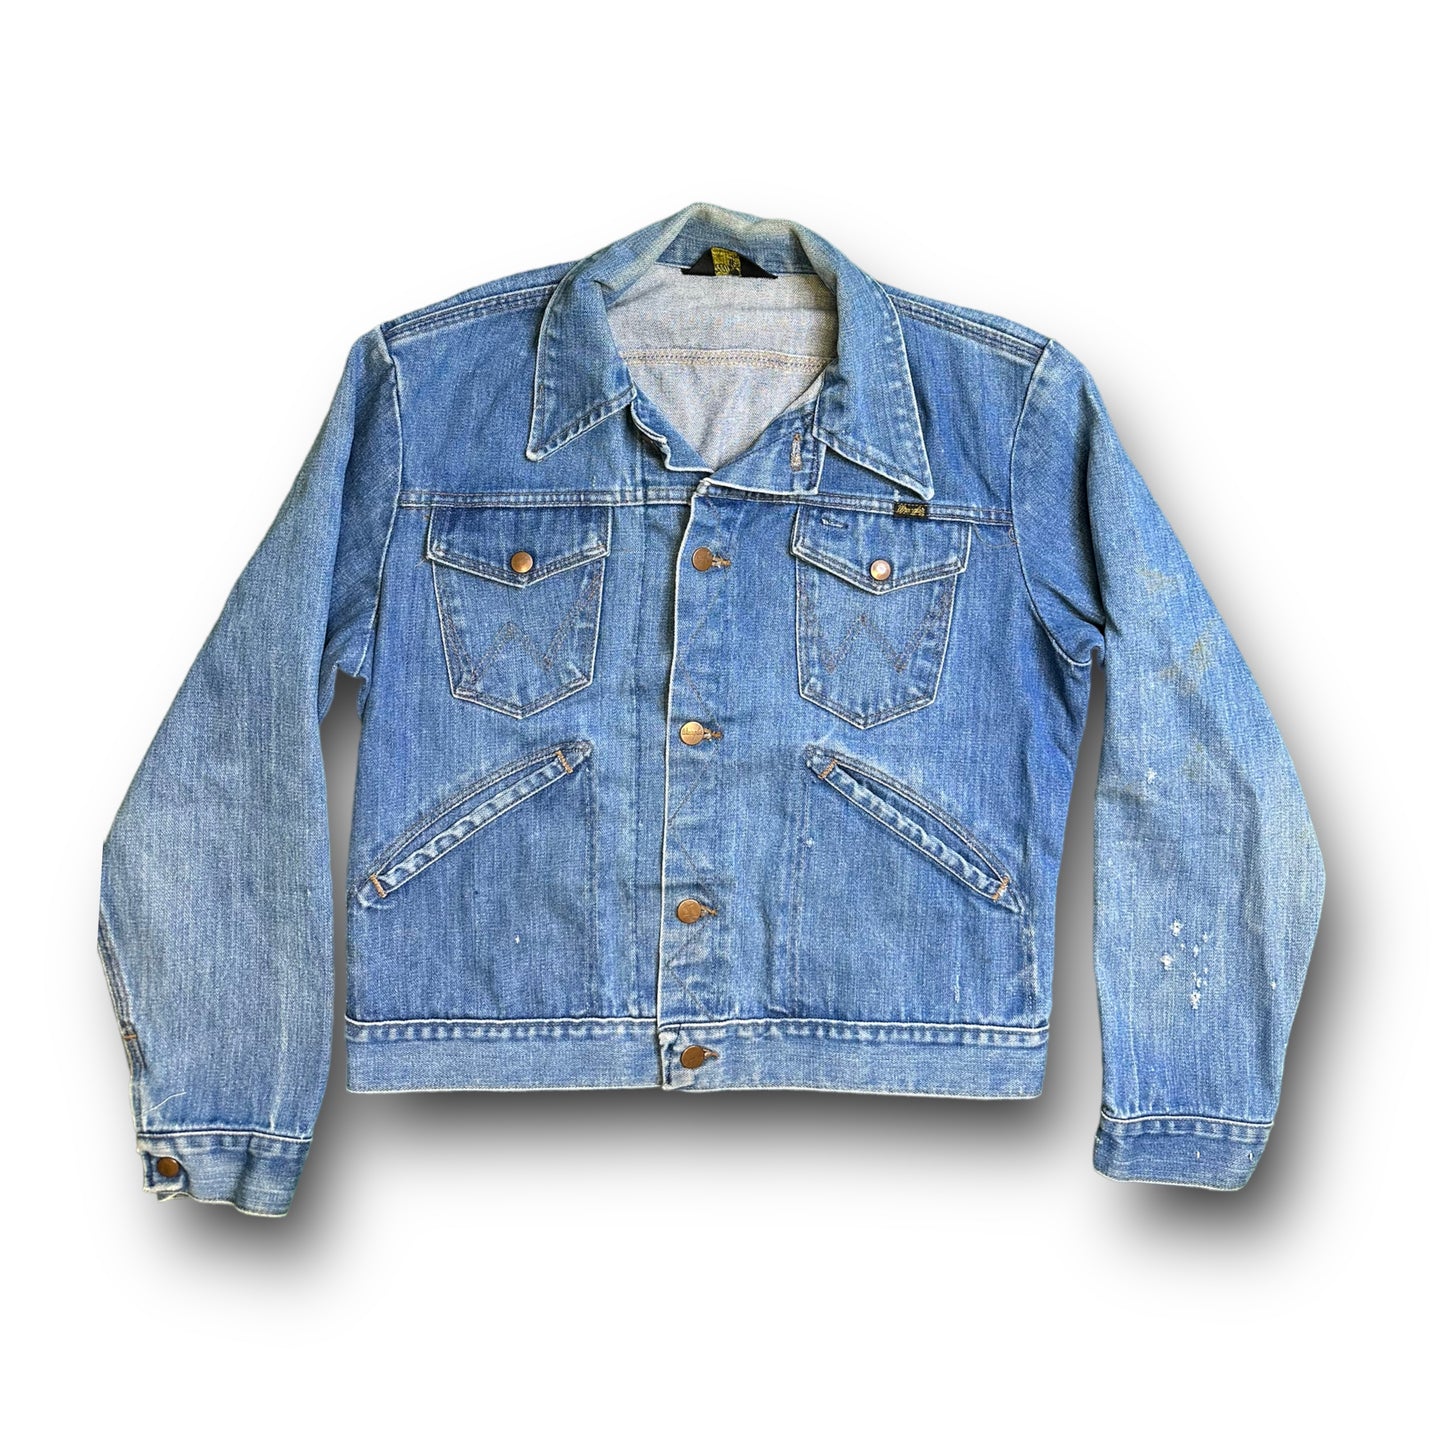 90s Women’s Patched Wrangler Jean Jacket (M)